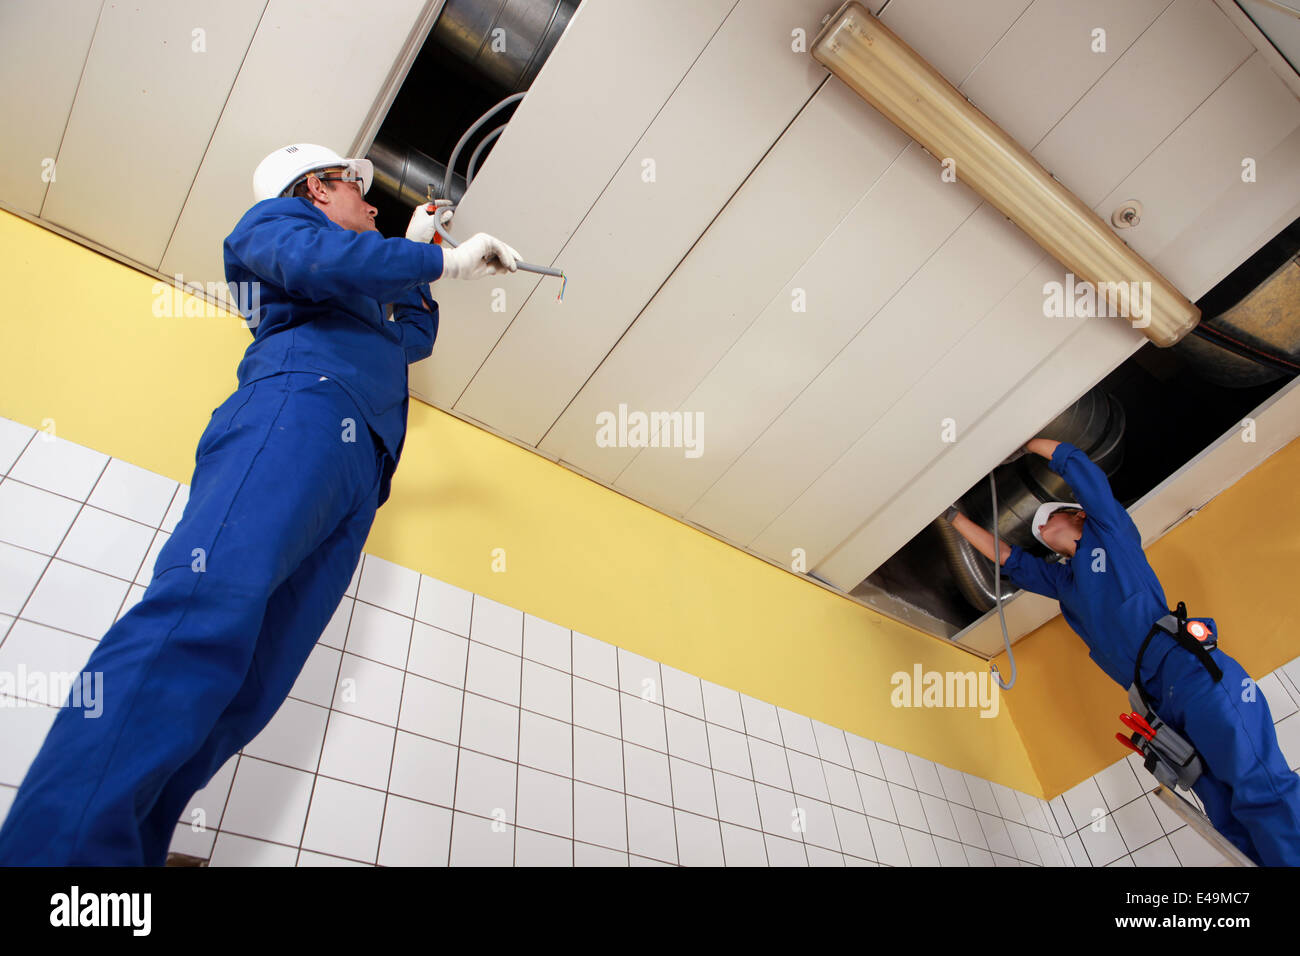 Two laborers working on ceiling piping Stock Photo